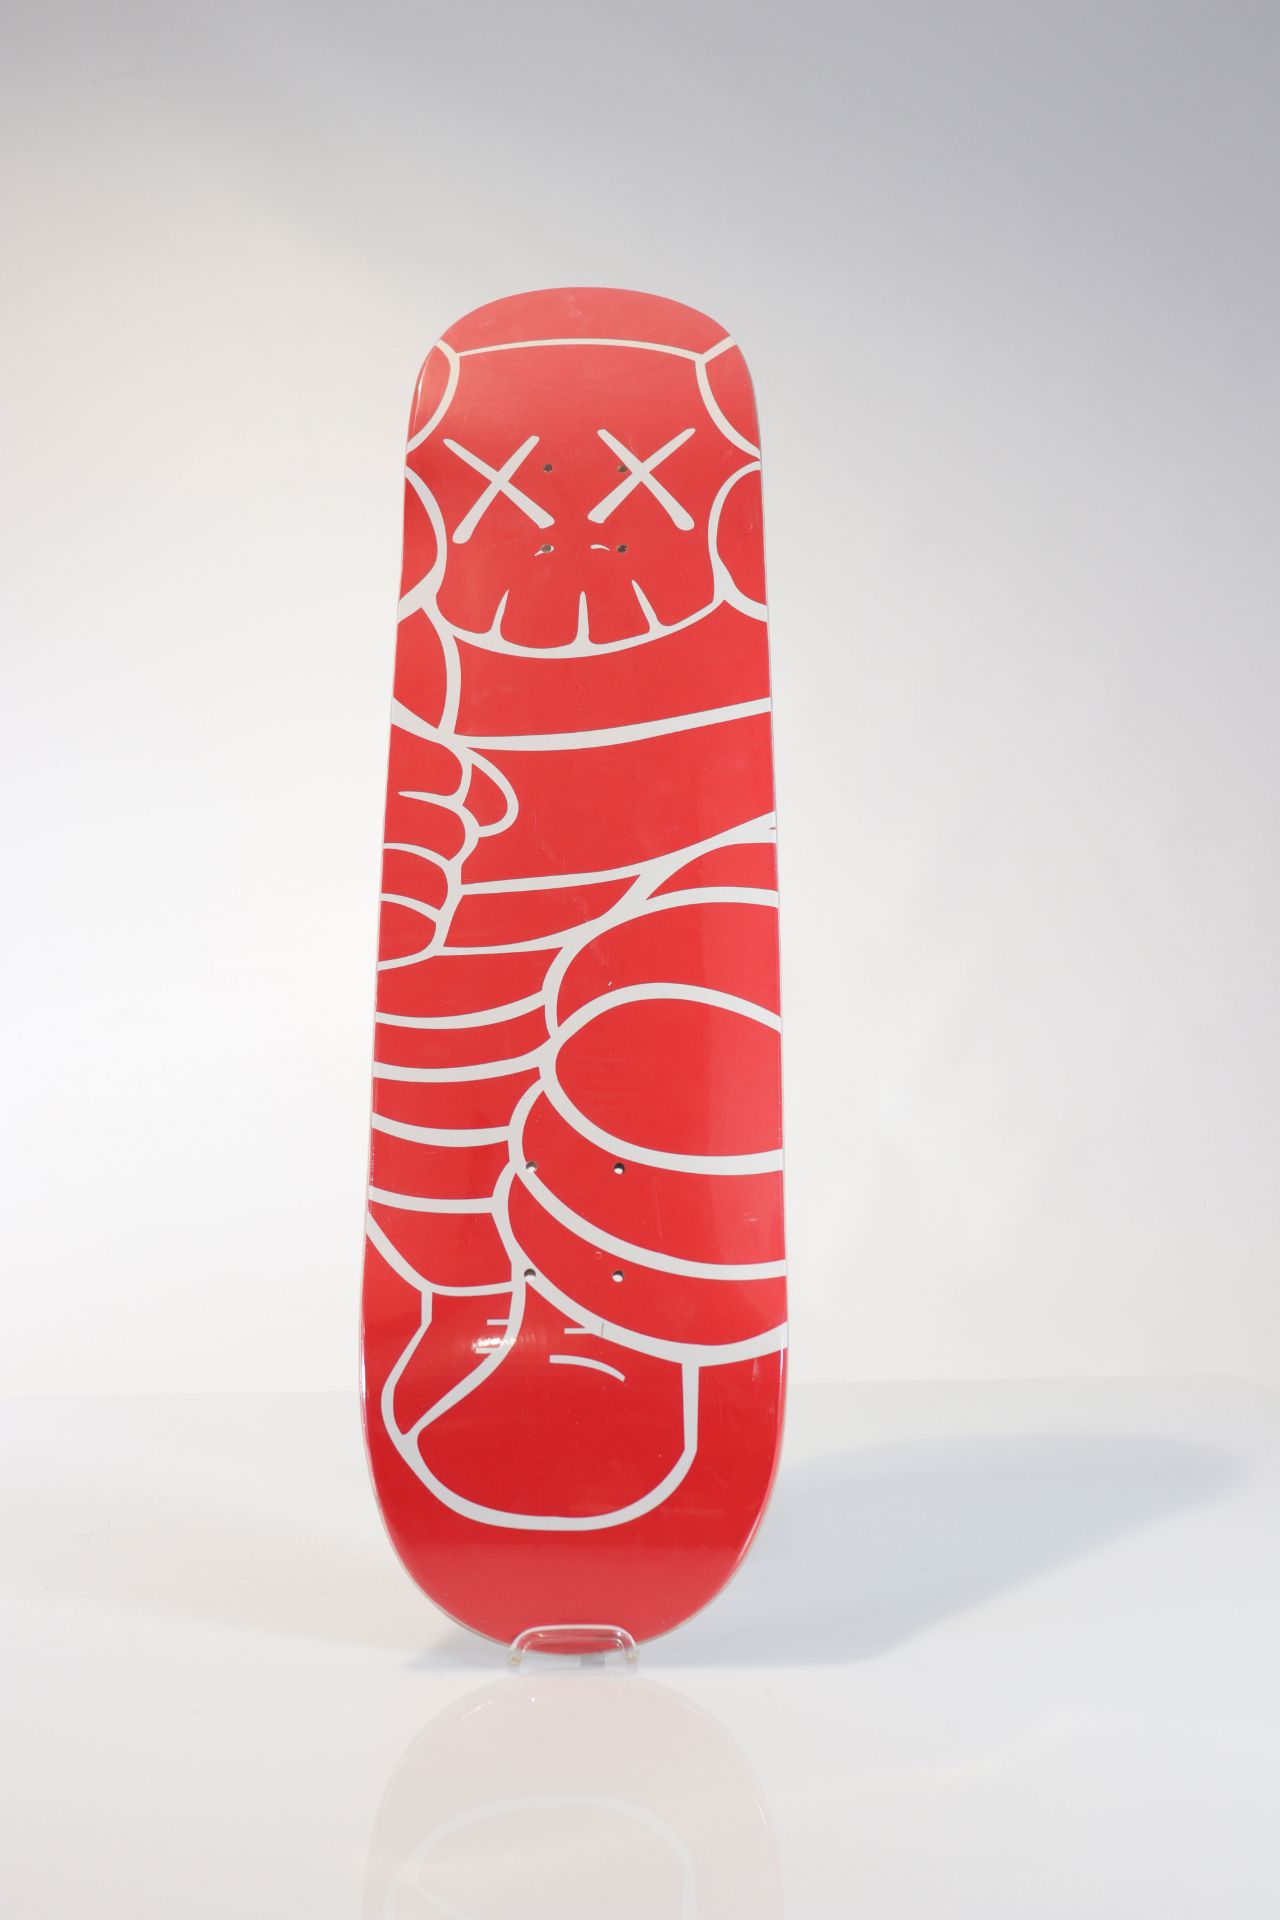 Kaws (after) - Chum, 2001 Screenprint on skateboard deck Made in limited edition by Kaws in collabo